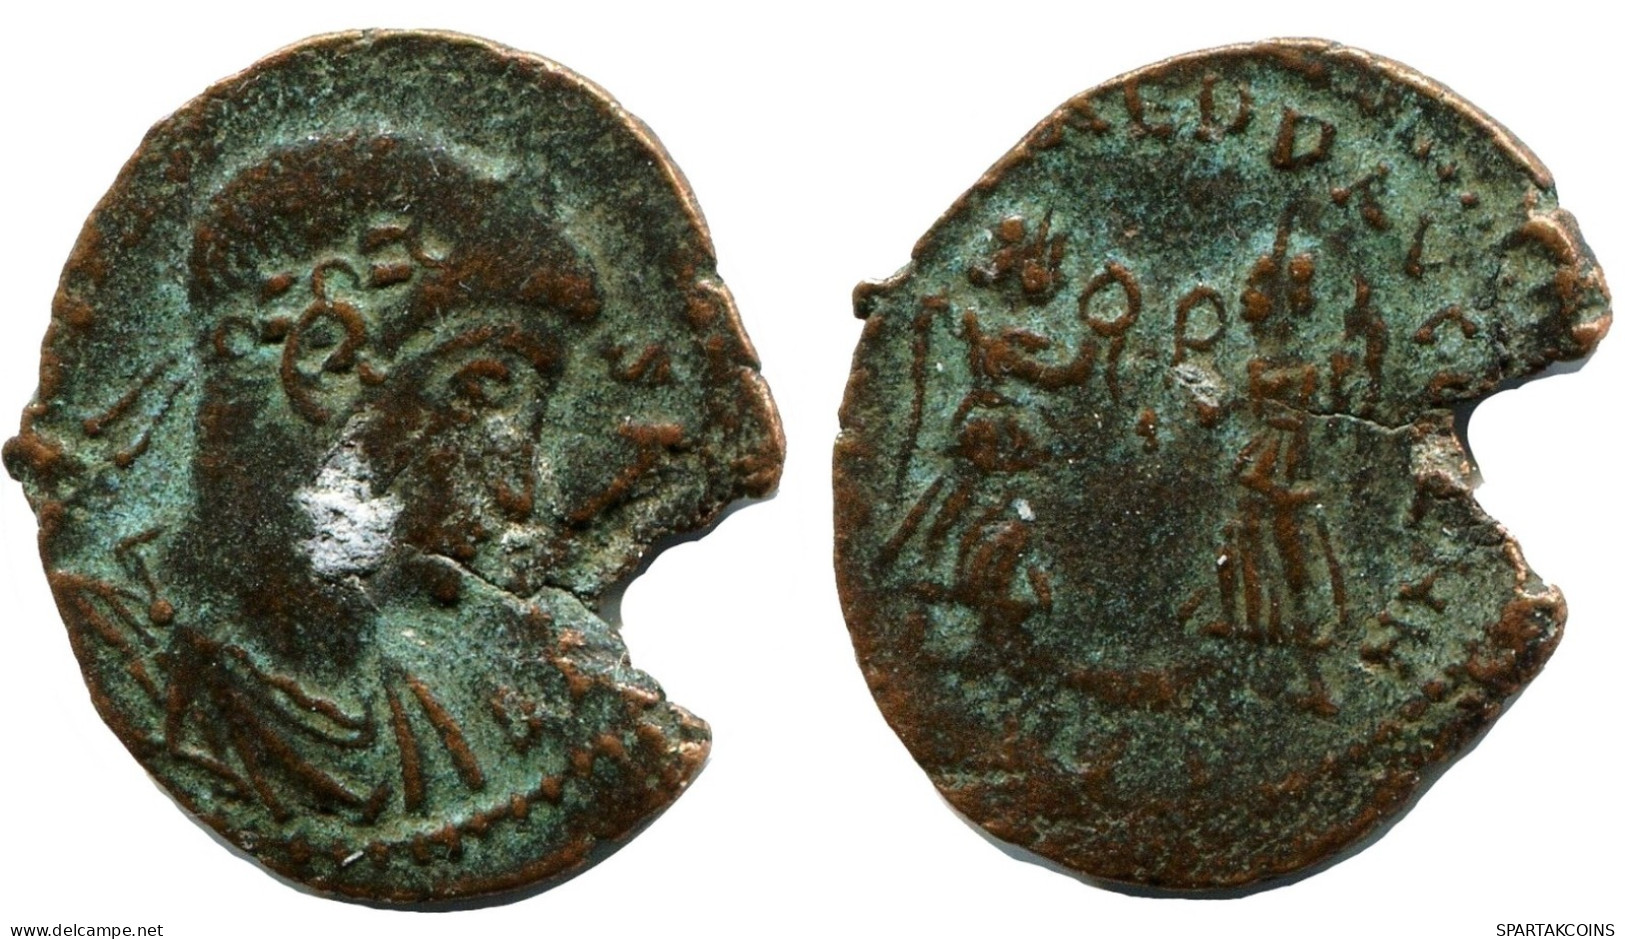 CONSTANS MINTED IN ROME ITALY FROM THE ROYAL ONTARIO MUSEUM #ANC11494.14.U.A - El Impero Christiano (307 / 363)